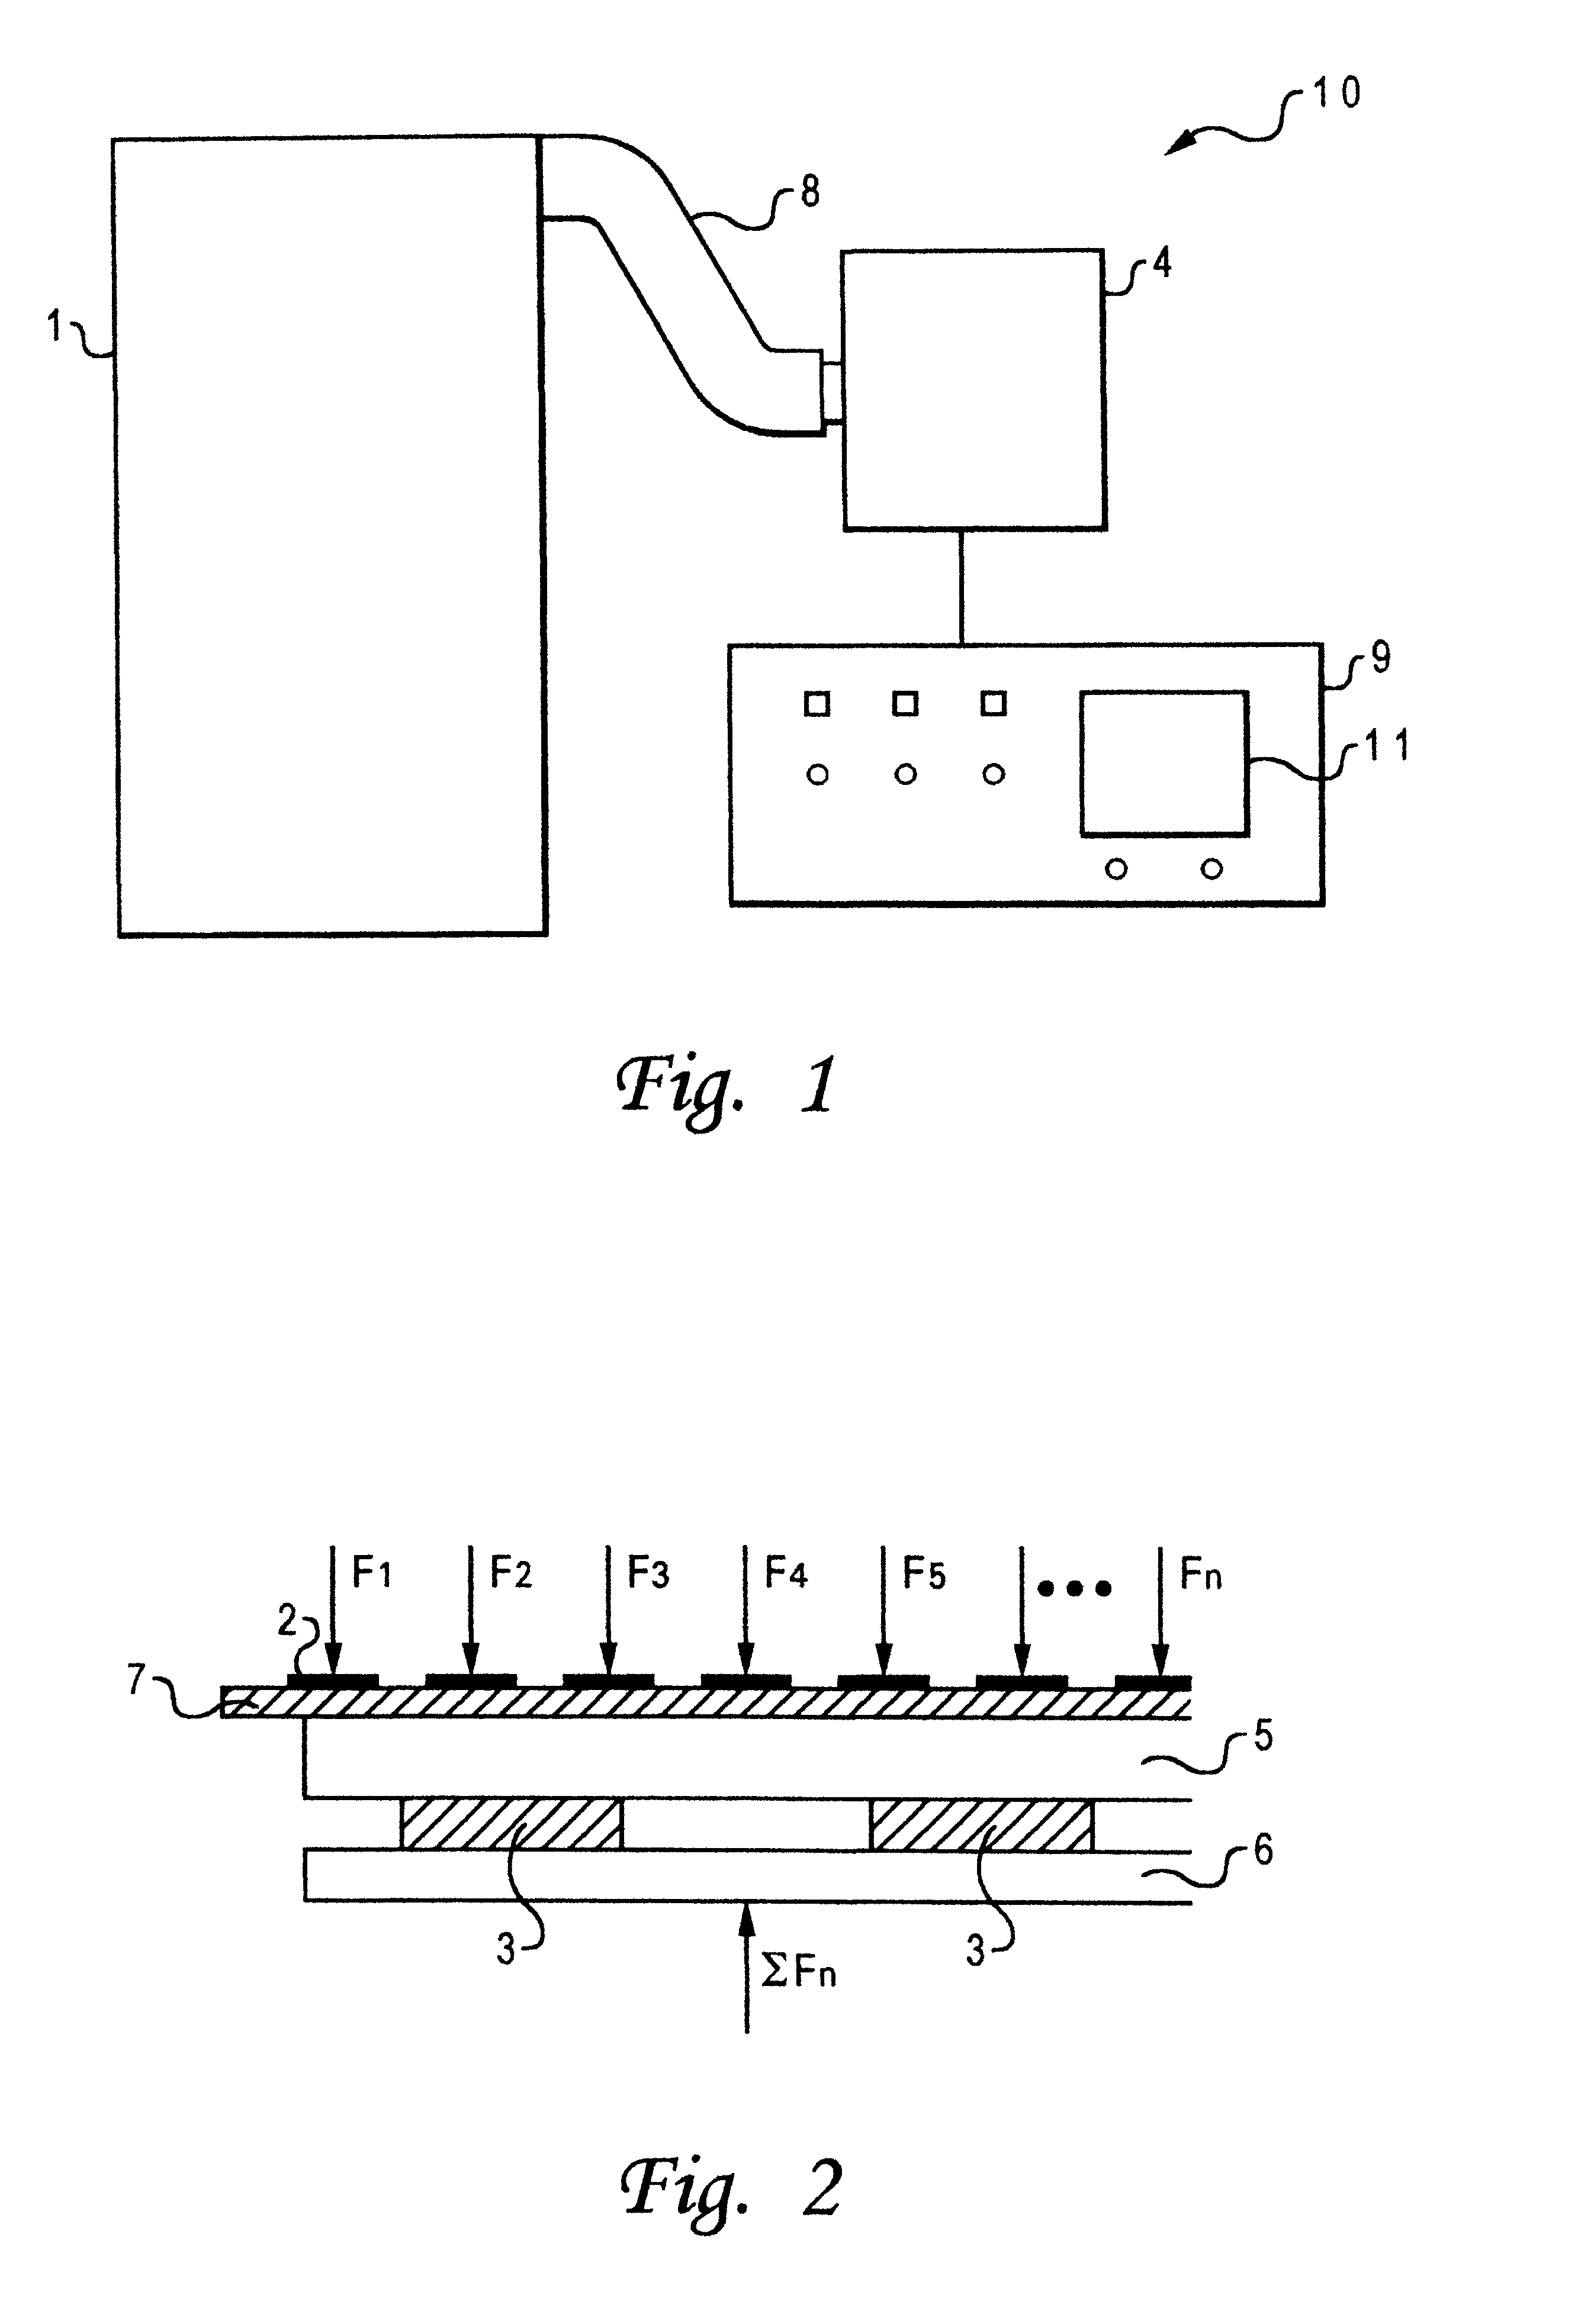 Apparatus and method for measuring the pressure distribution generated by a three-dimensional object